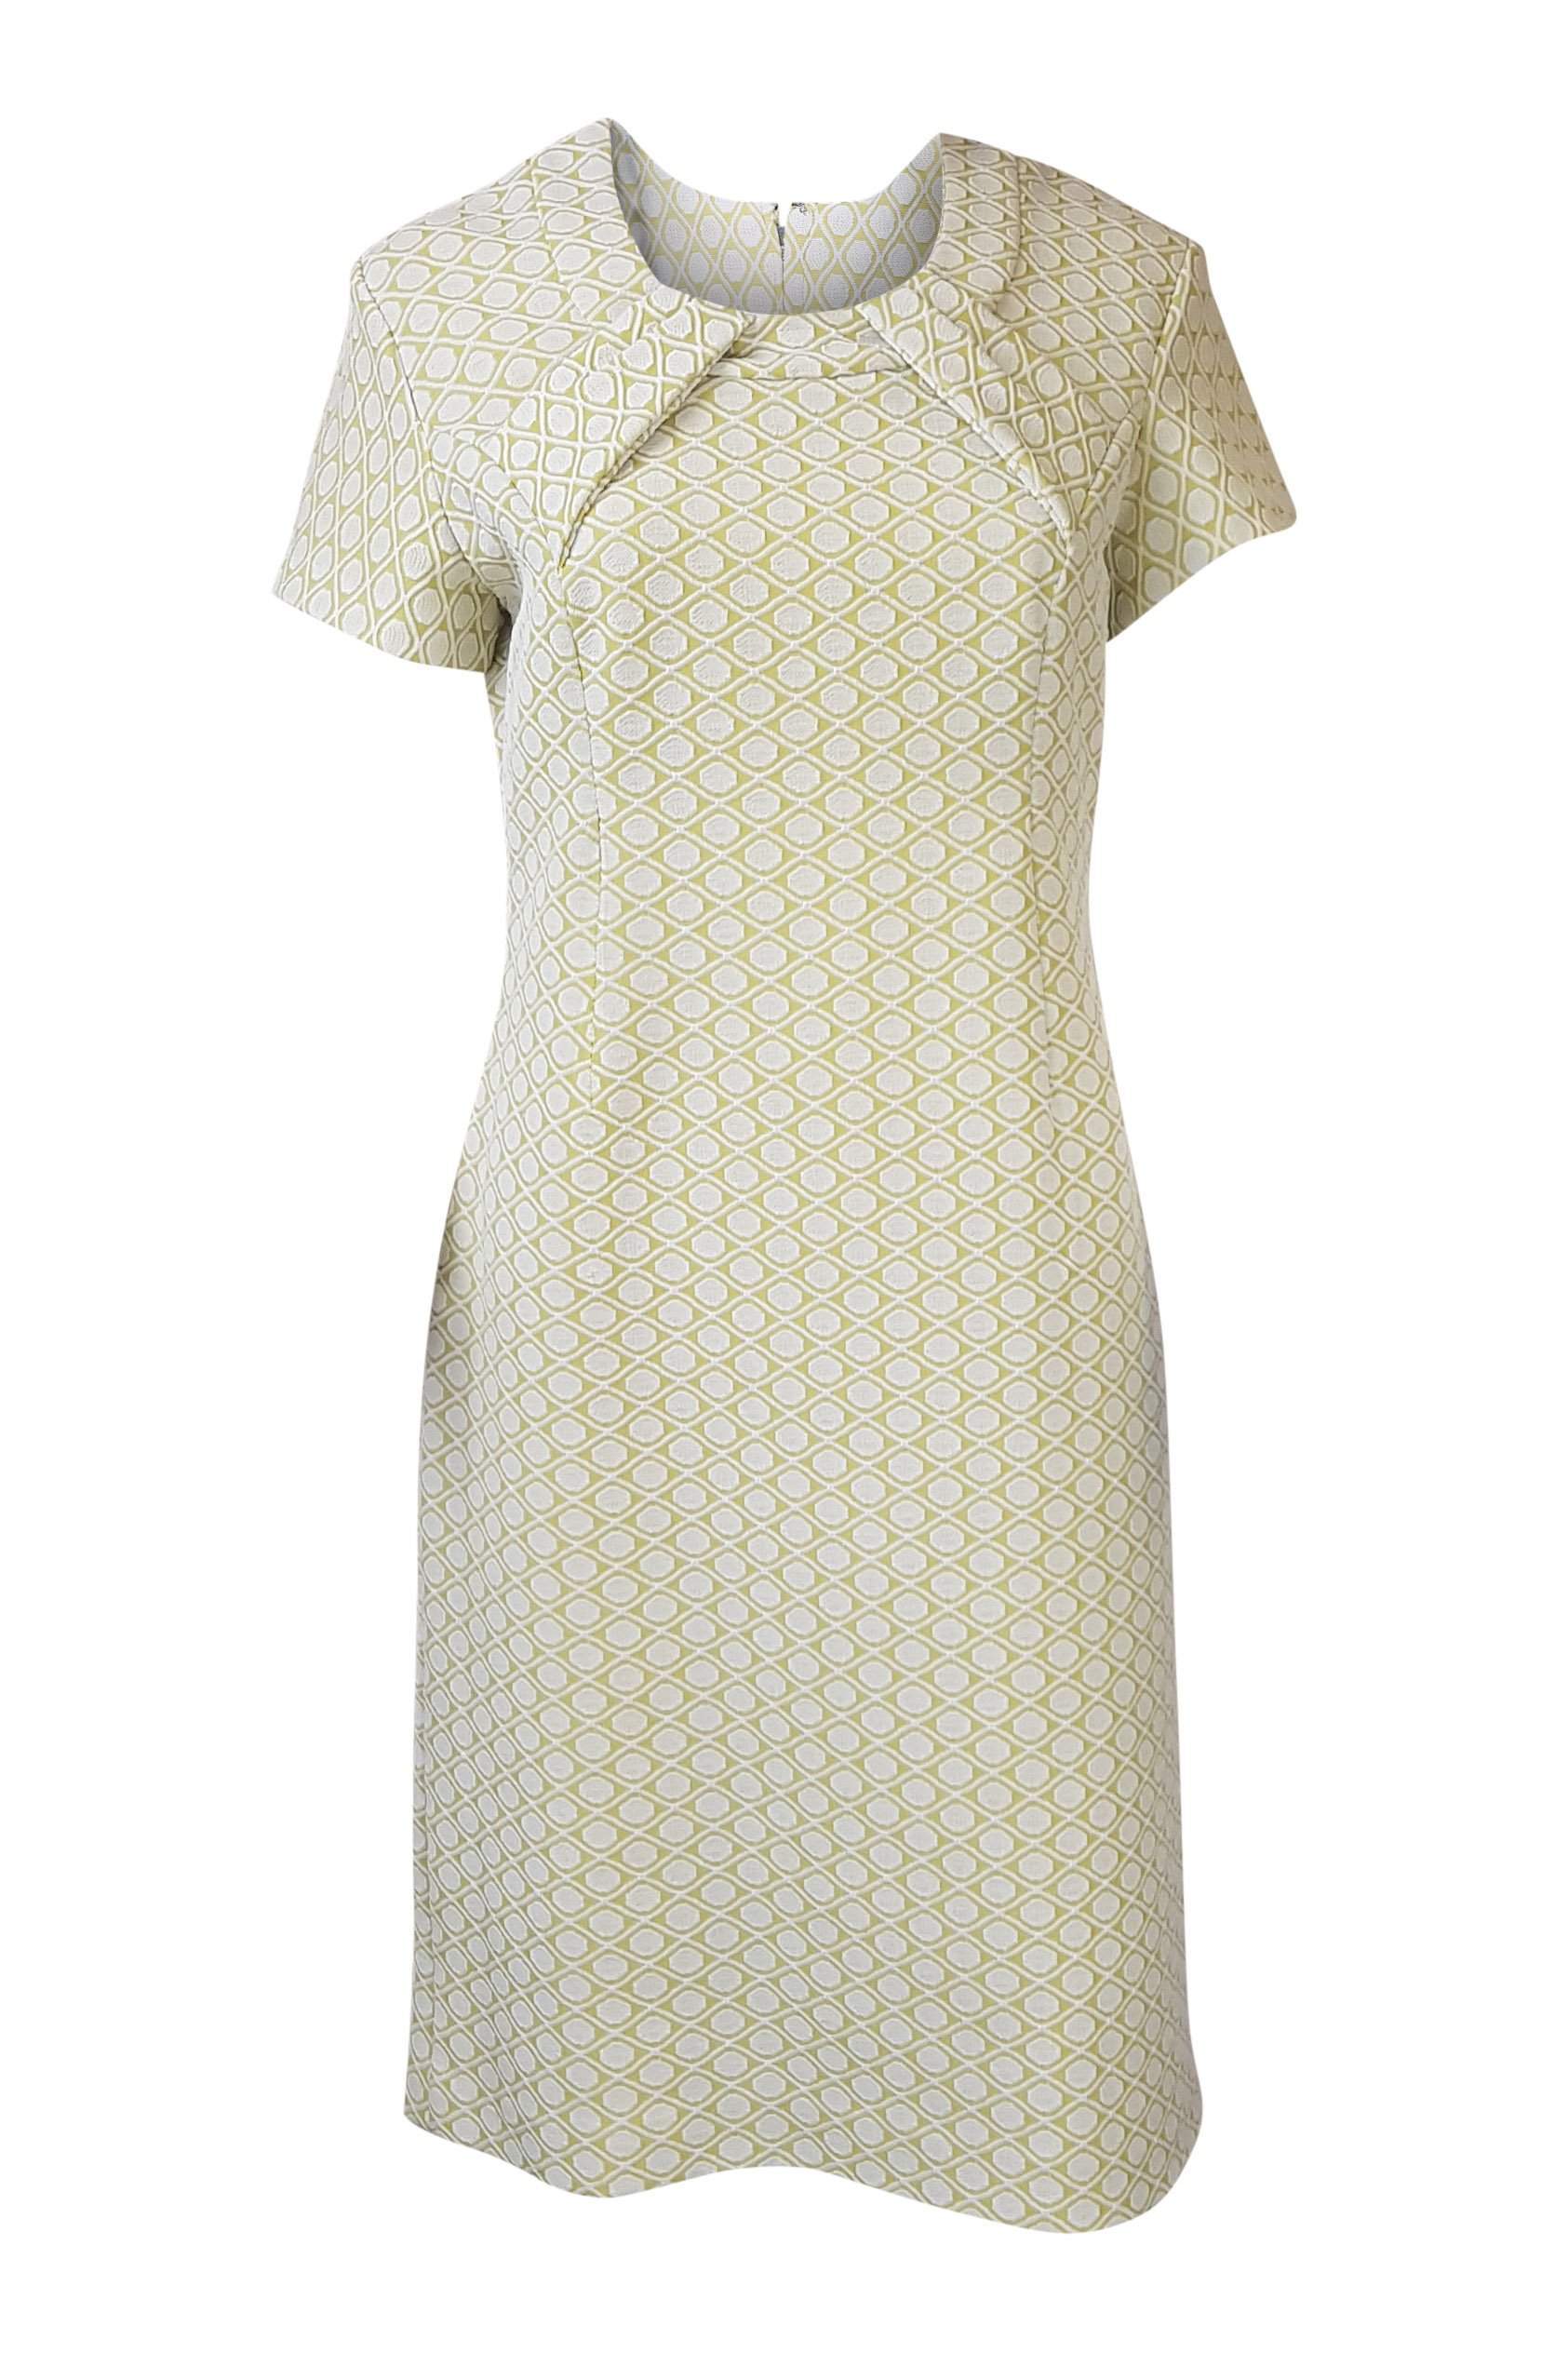 UNBRANDED Lime Green And White Geometric Vintage Dress (UK 14)-Unbranded-The Freperie